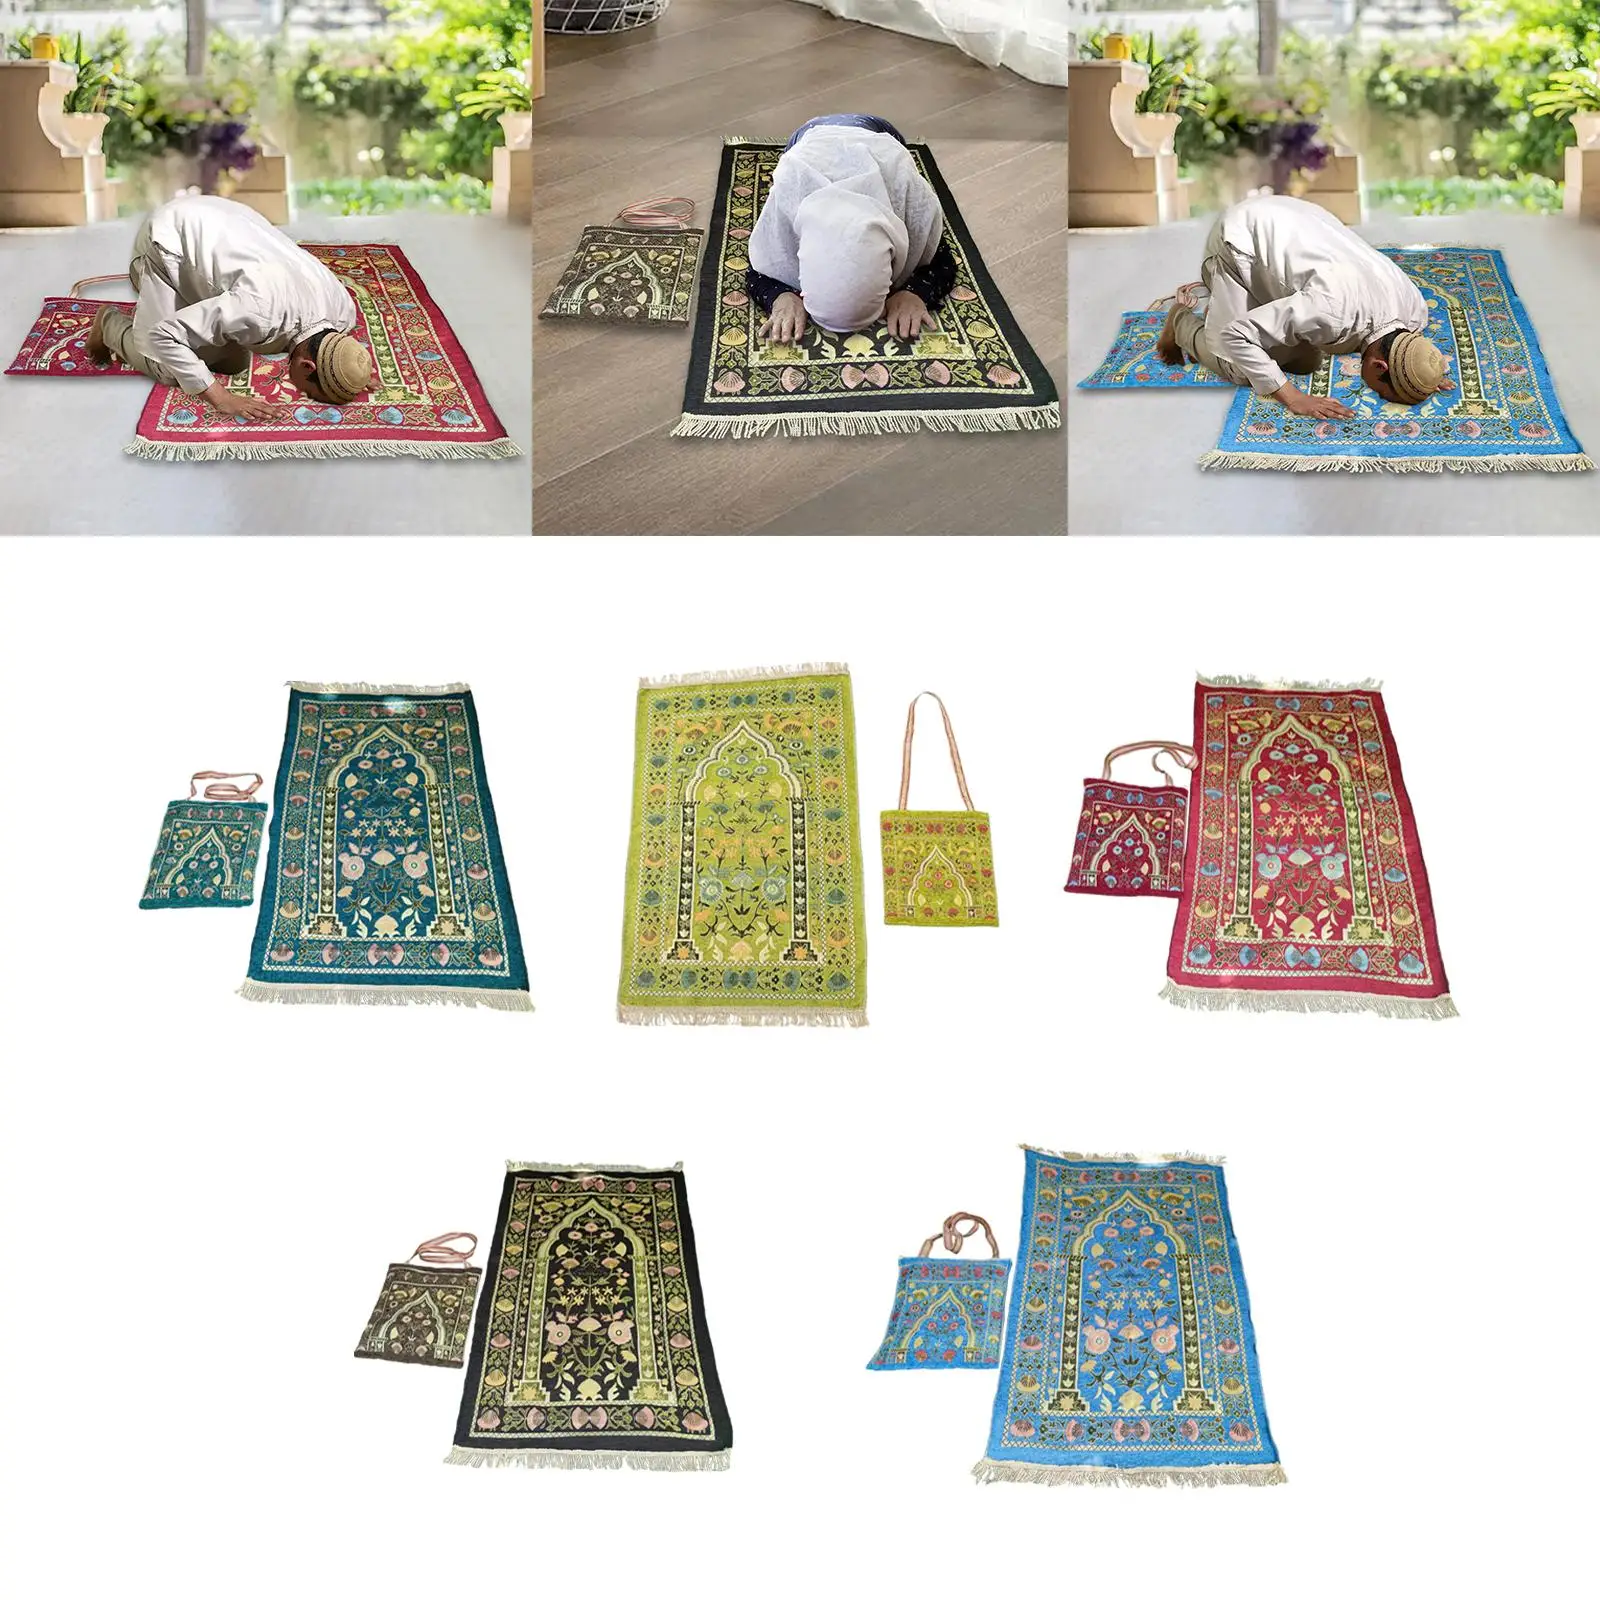 Praying Mat with Carrying Bag Travel Rug 70cmx110cm Area Rugs Elegant Design Travel Mat for Home Party Travel Bedroom Outdoor